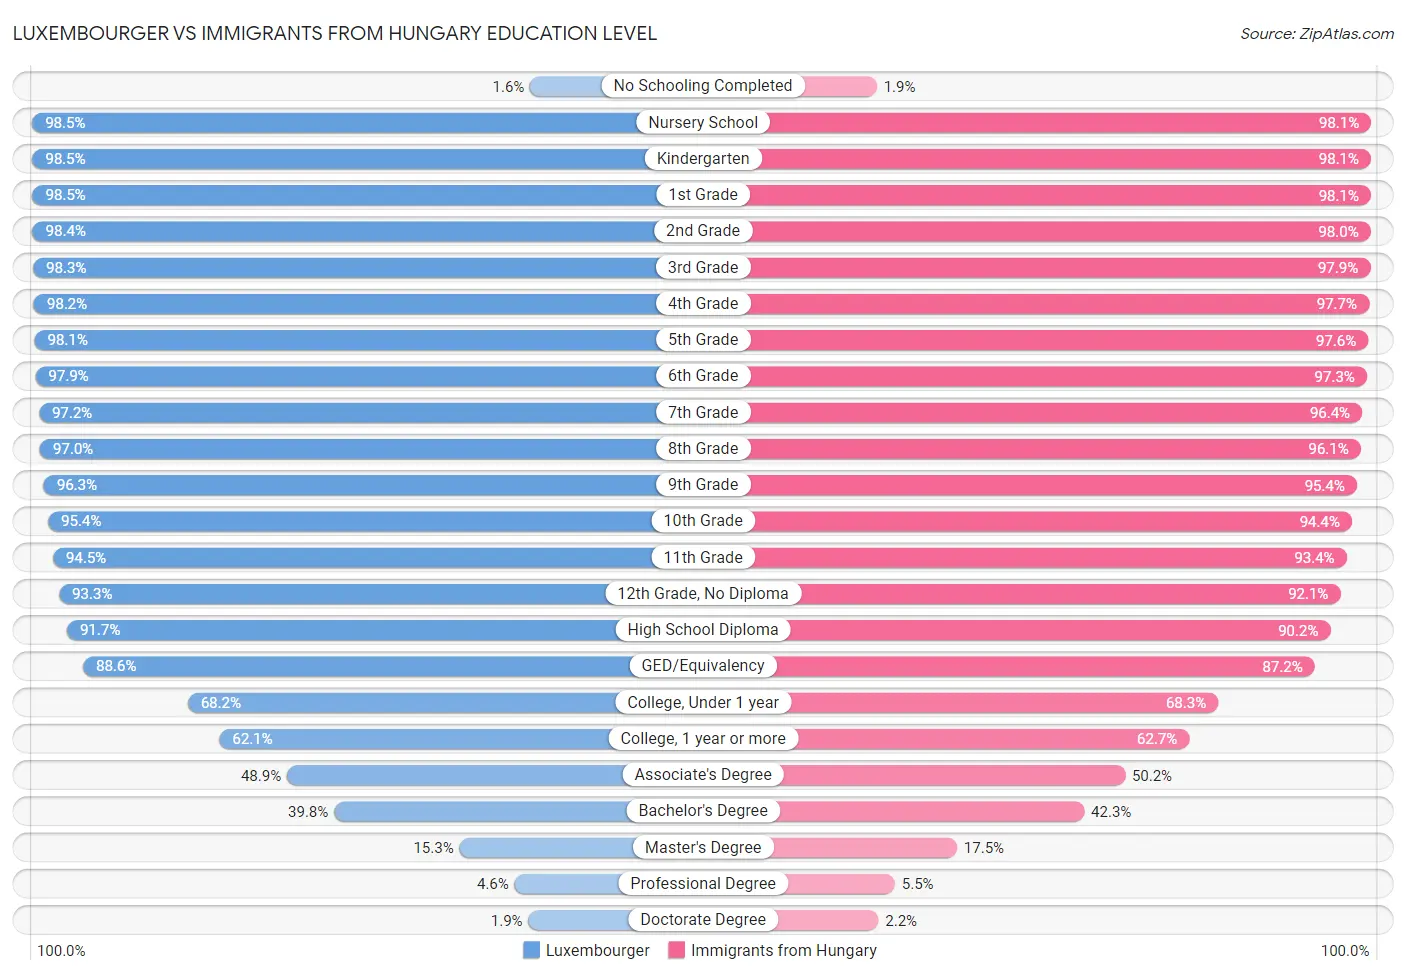 Luxembourger vs Immigrants from Hungary Education Level